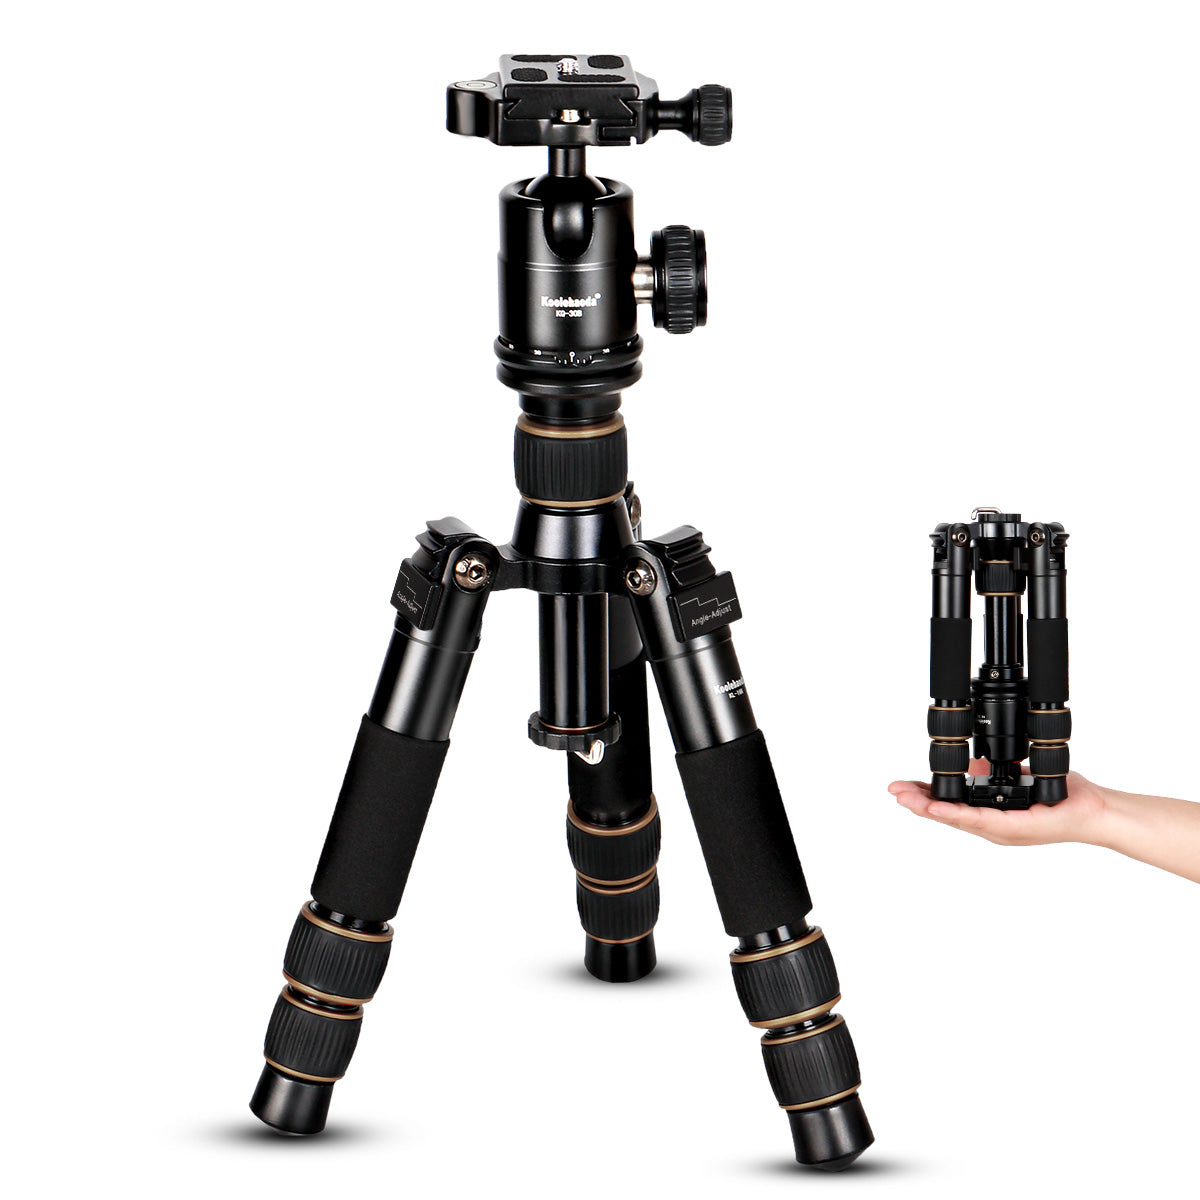 Portable Tabletop Mini Tripod with Ball Head,Height Adjustable 9-21.5inch, Compact Desktop Macro Mini Tripod with Carrying Bag for DSLR Camera (KQ-166)